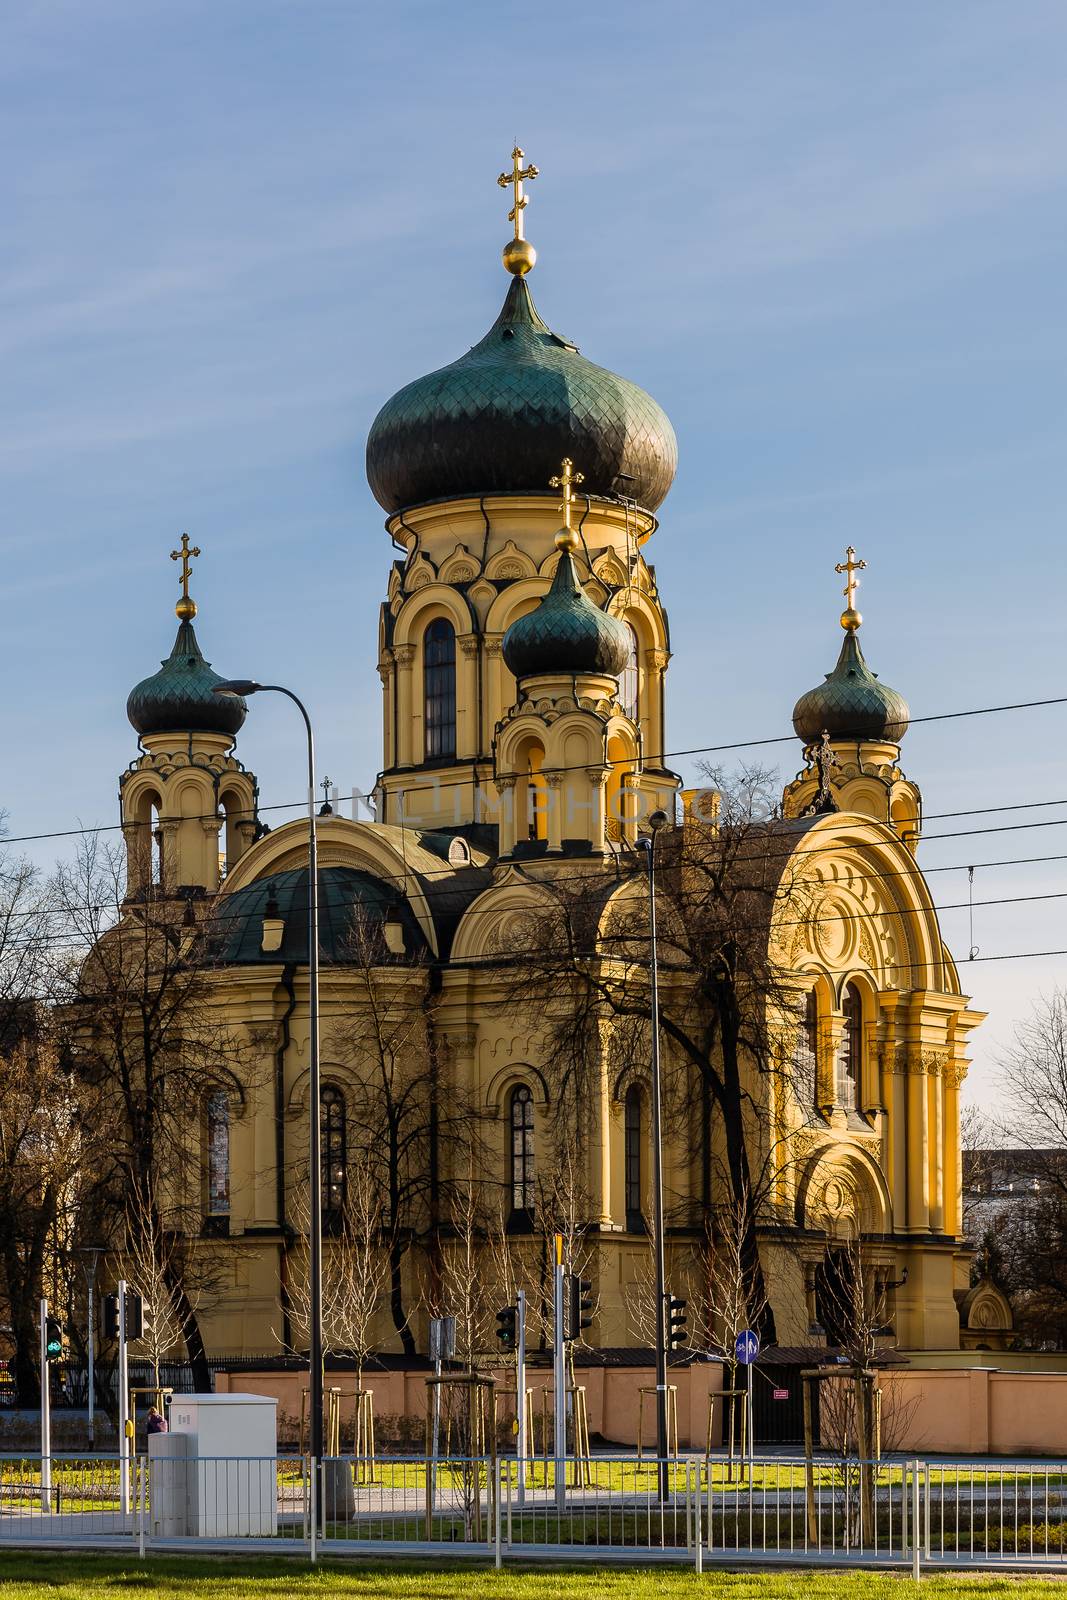 The Metropolitan Council of the Holy Equal to the Apostles of Mary Magdalene in Warsaw. Cathedral built in 1869 on a Greek cross is the main Polish Orthodox Church in Poland.